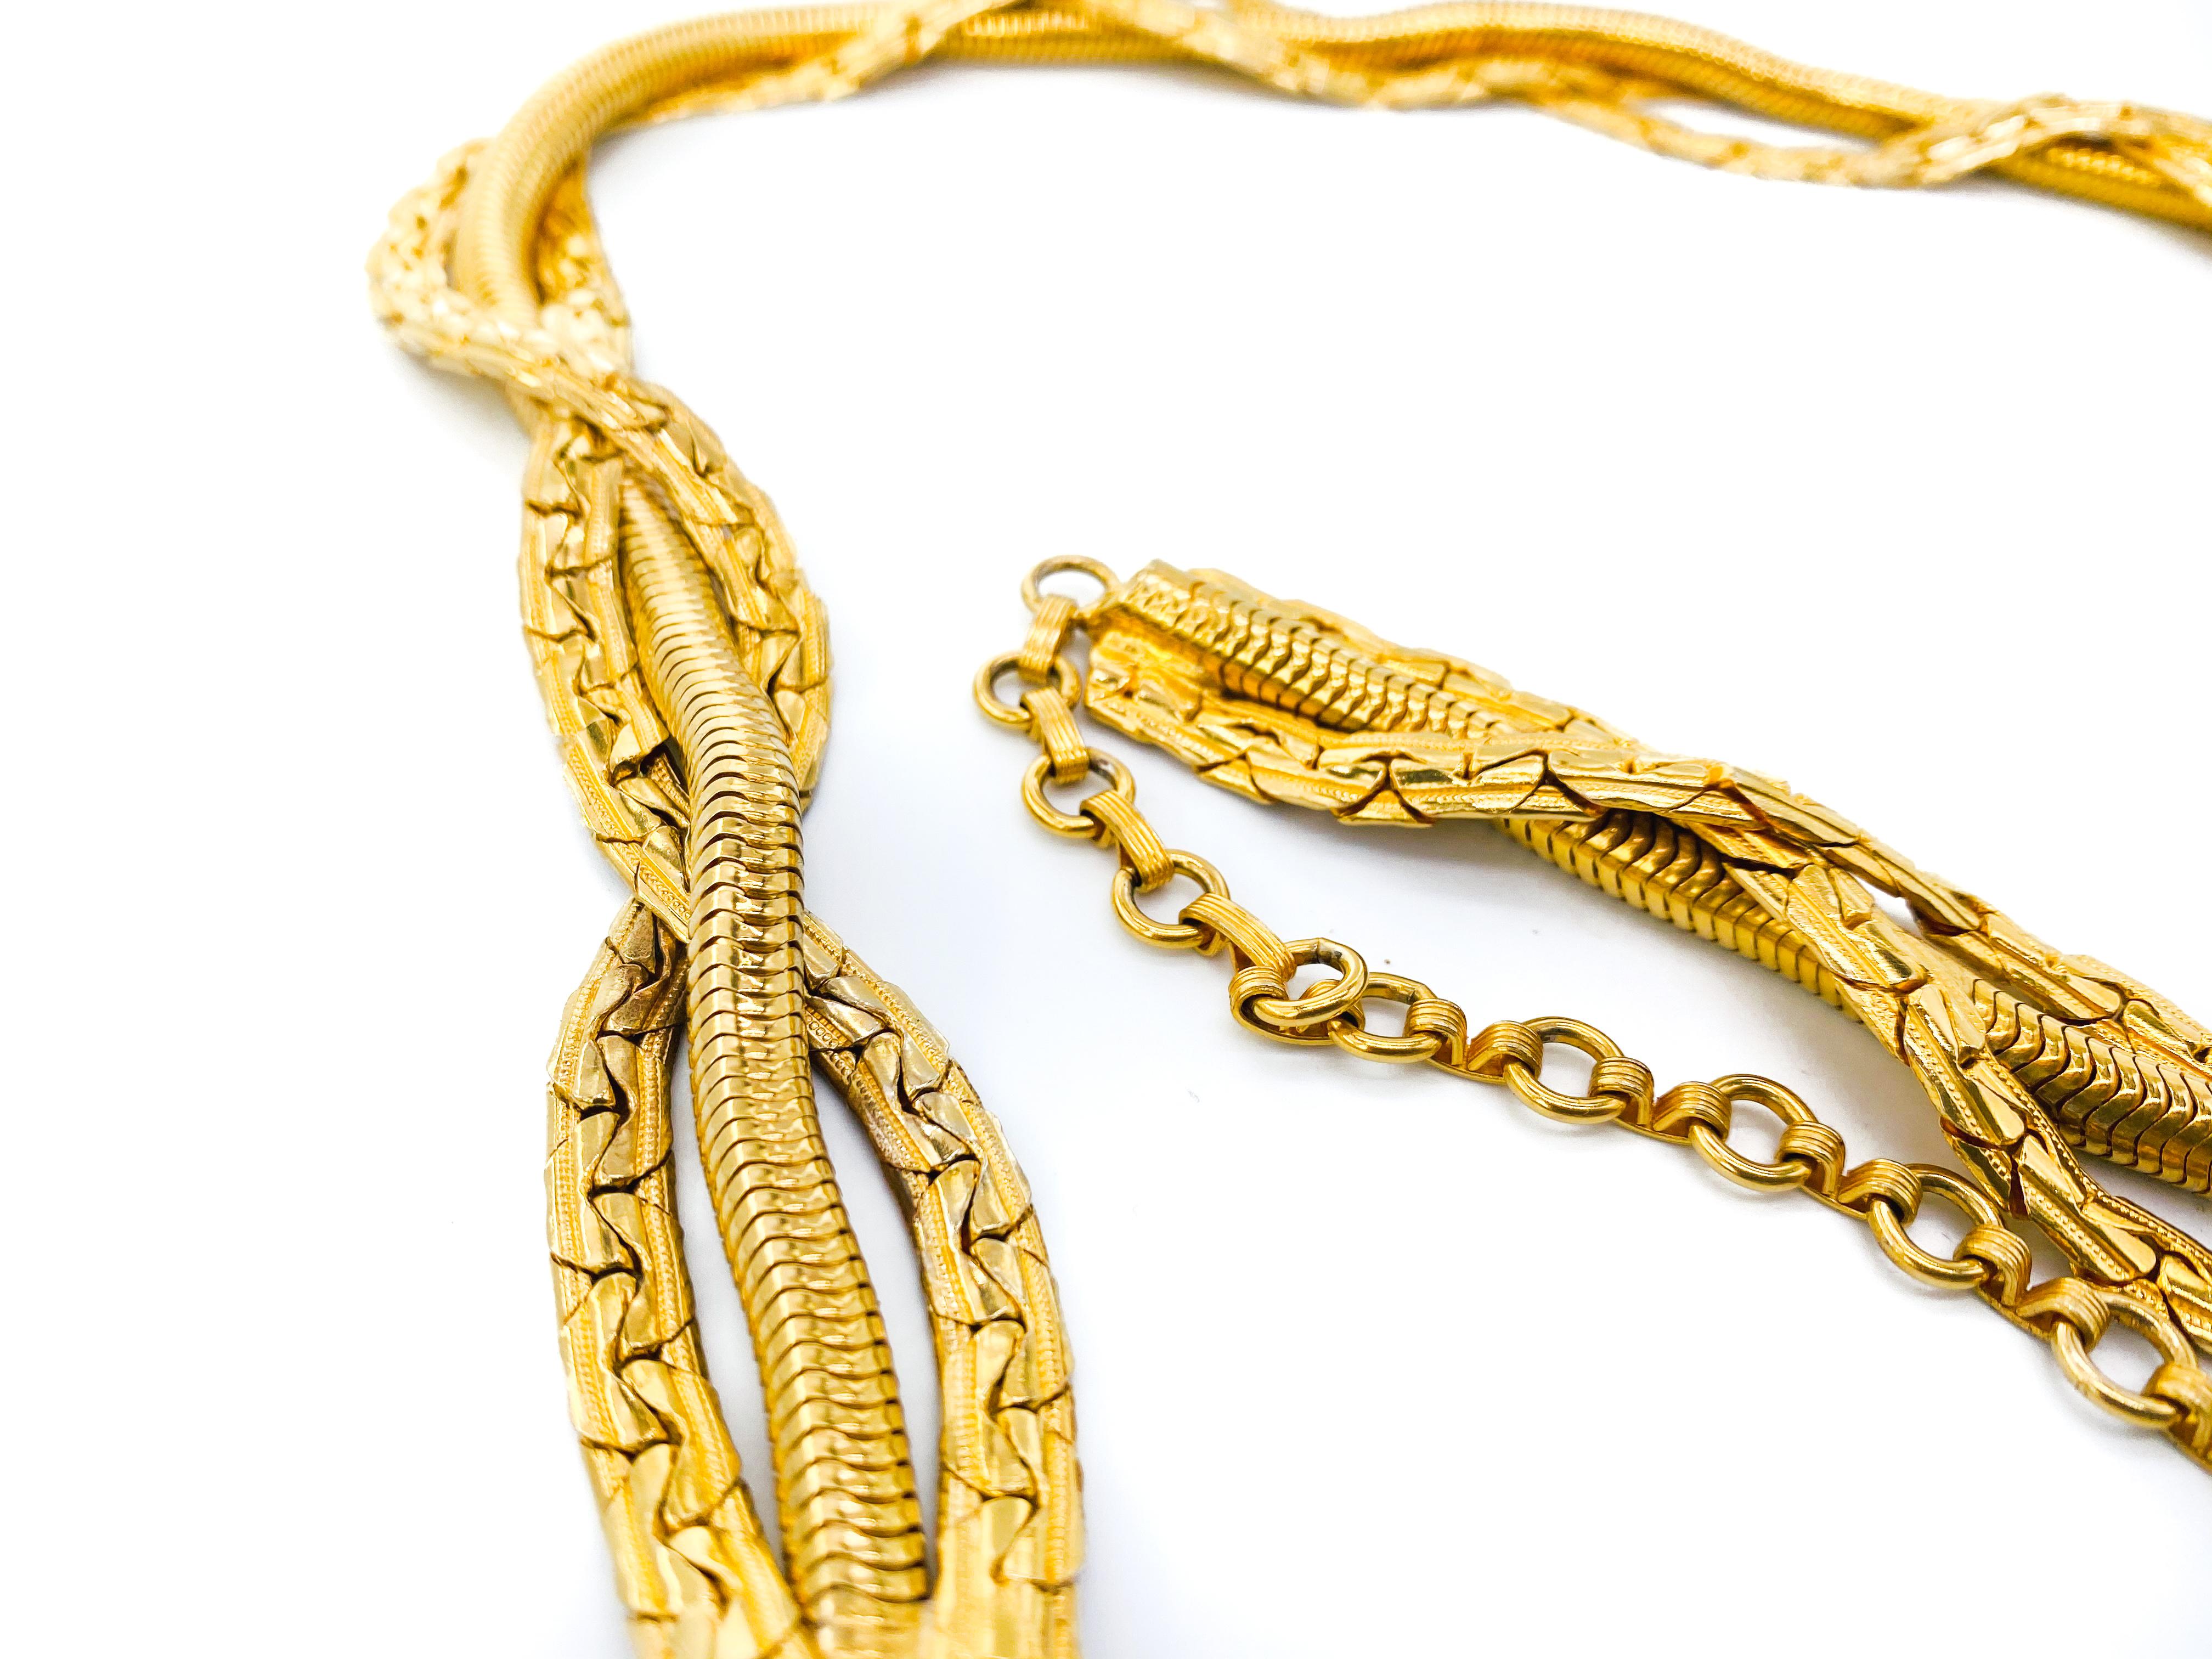 Dior Belt 1980s Vintage Necklace and Belt

A stunning piece from the 1980s Dior archive. Cast from a high quality gold plated metal, it features a delicately elaborate woven chain with a drop chain and pendant. 

Can be worn both as a belt and a